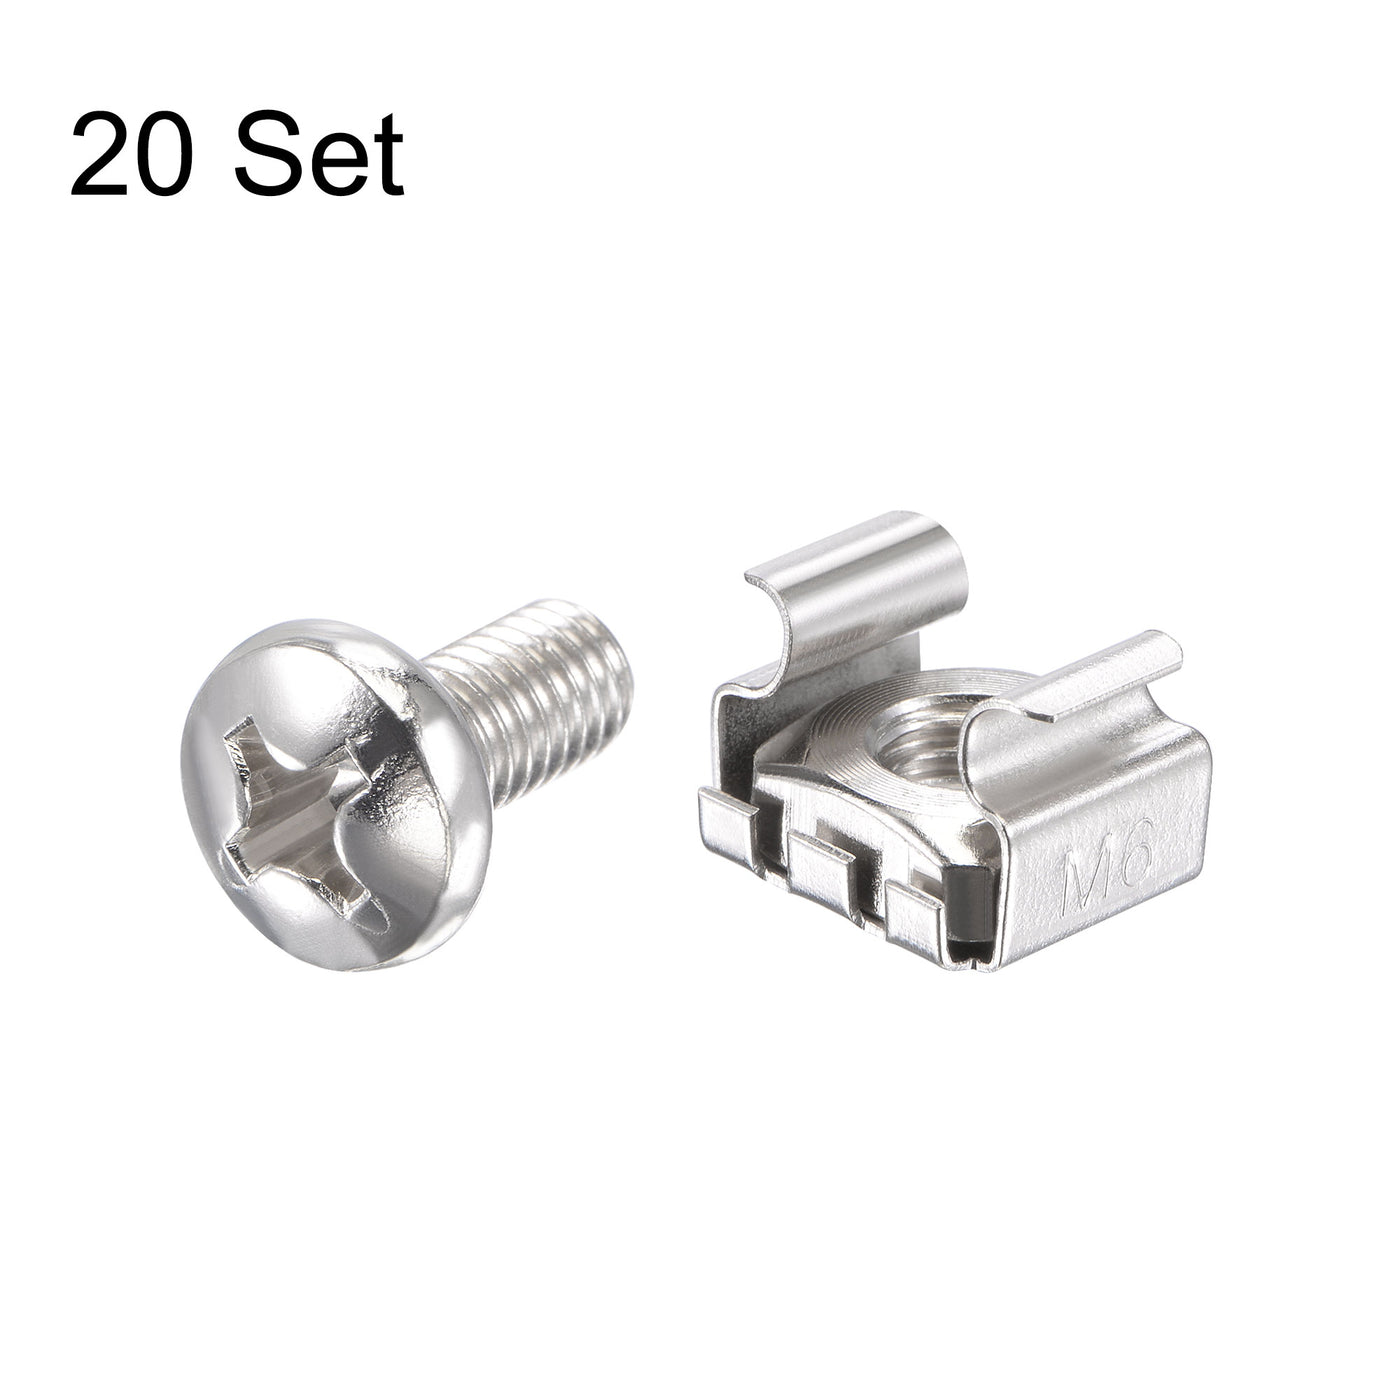 uxcell Uxcell Rack Screws, M6x12mm Screws and Cage Nuts 20Set for Server Shelf Rack